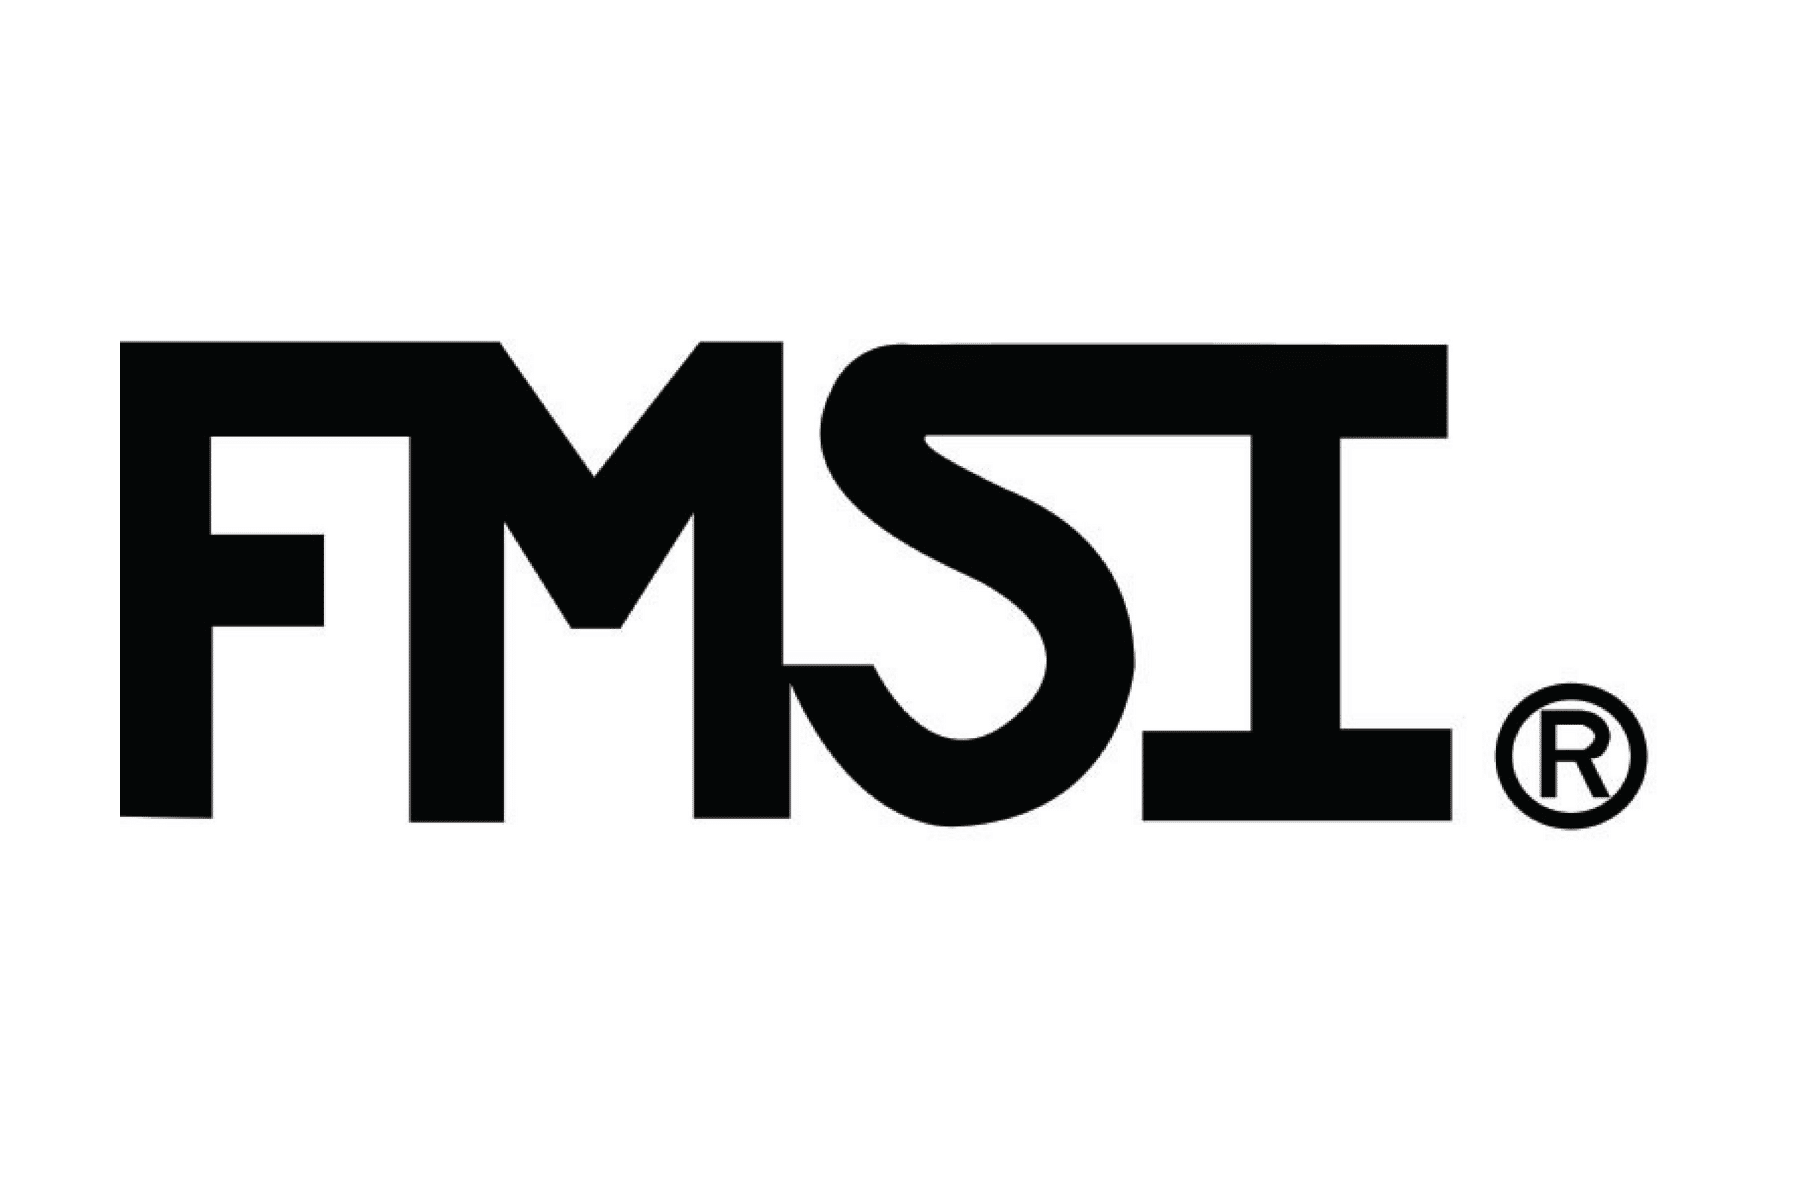 FMSI recently elected its new officers and board members